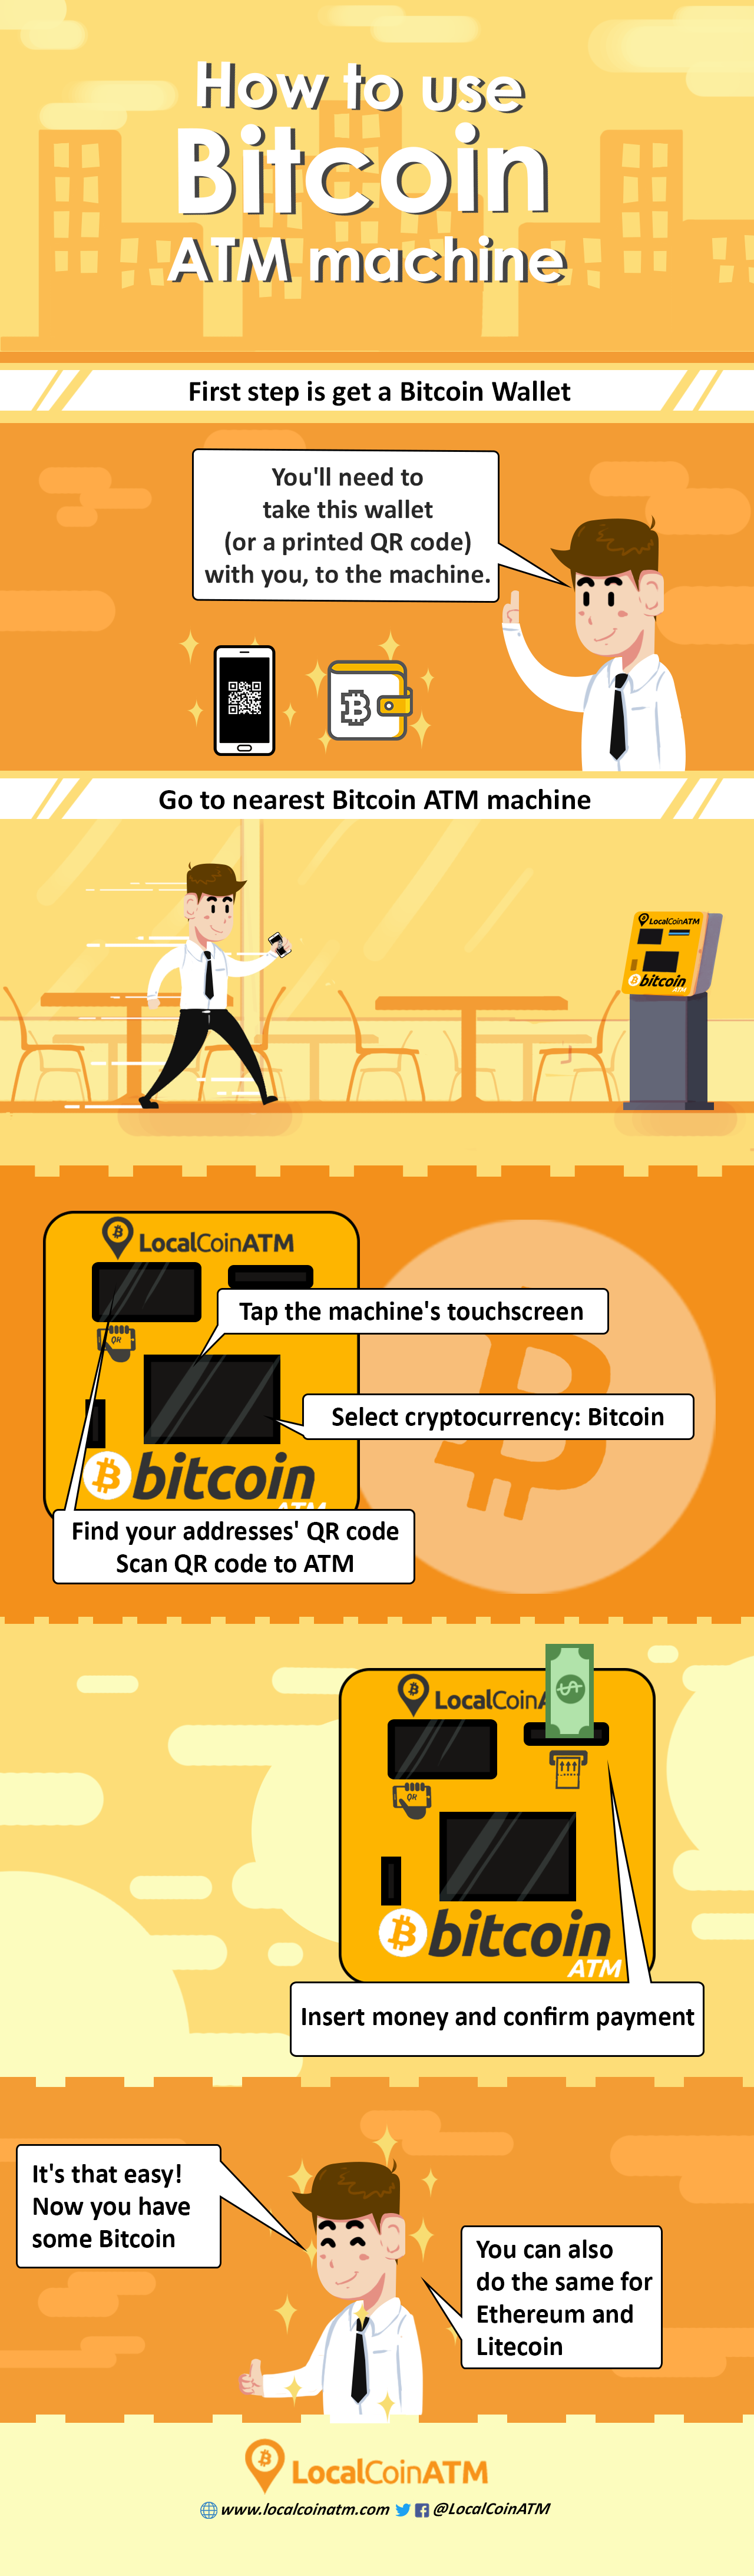 +how +a +bitcoin +atm +works